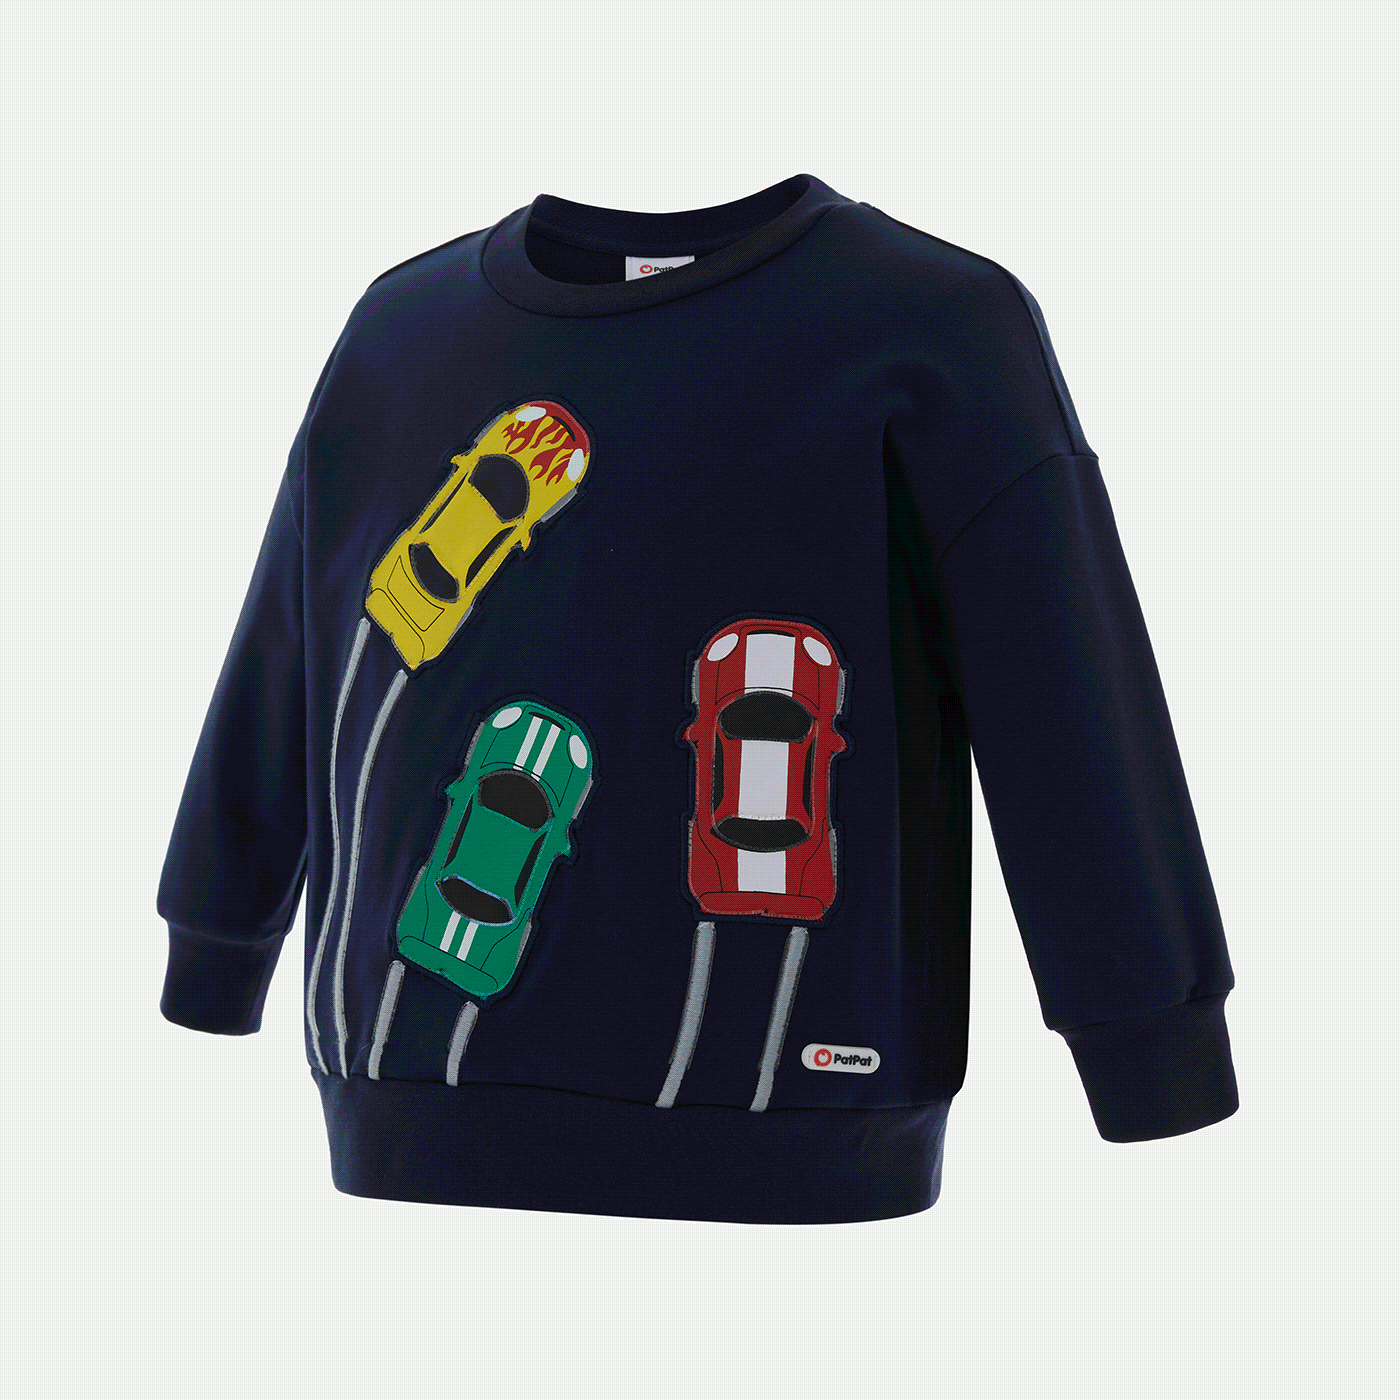 Go-Glow Illuminating Sweatshirt with Light Up Racing Cars Including Controller (Built-In Battery) Dark Blue big image 4